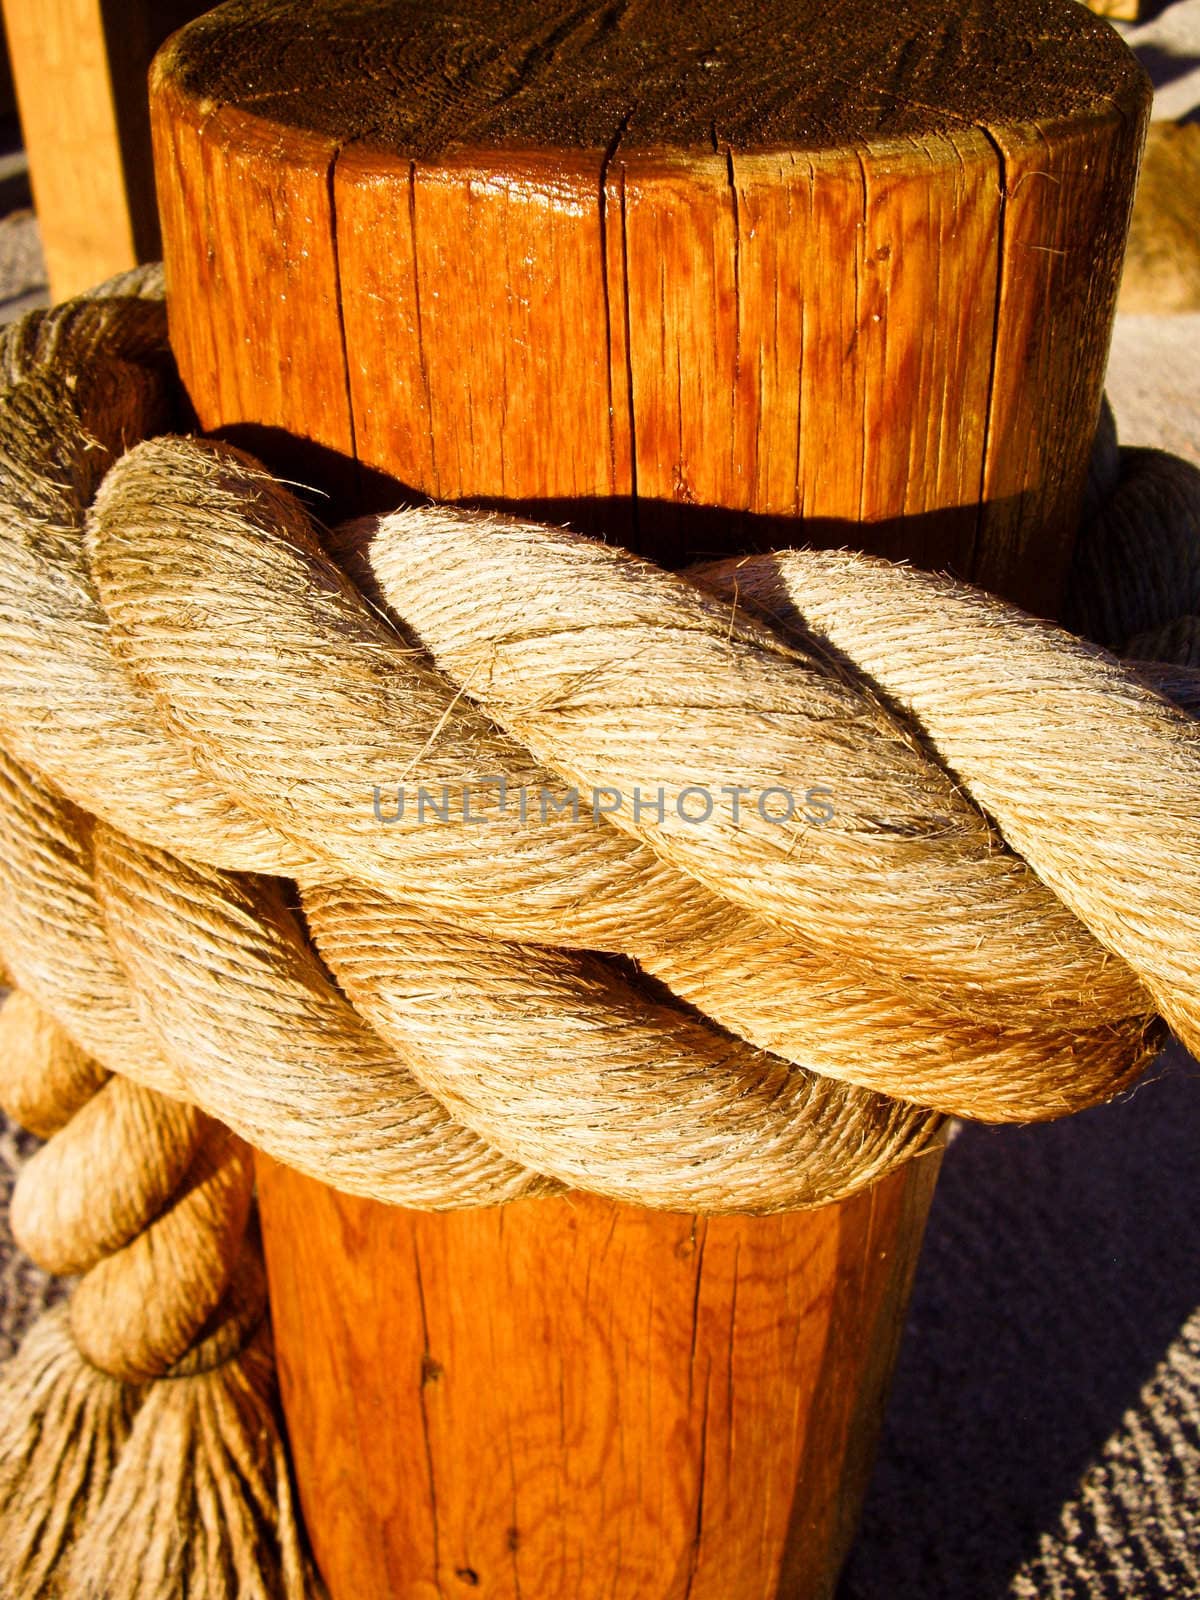 Rope on a Post by emattil